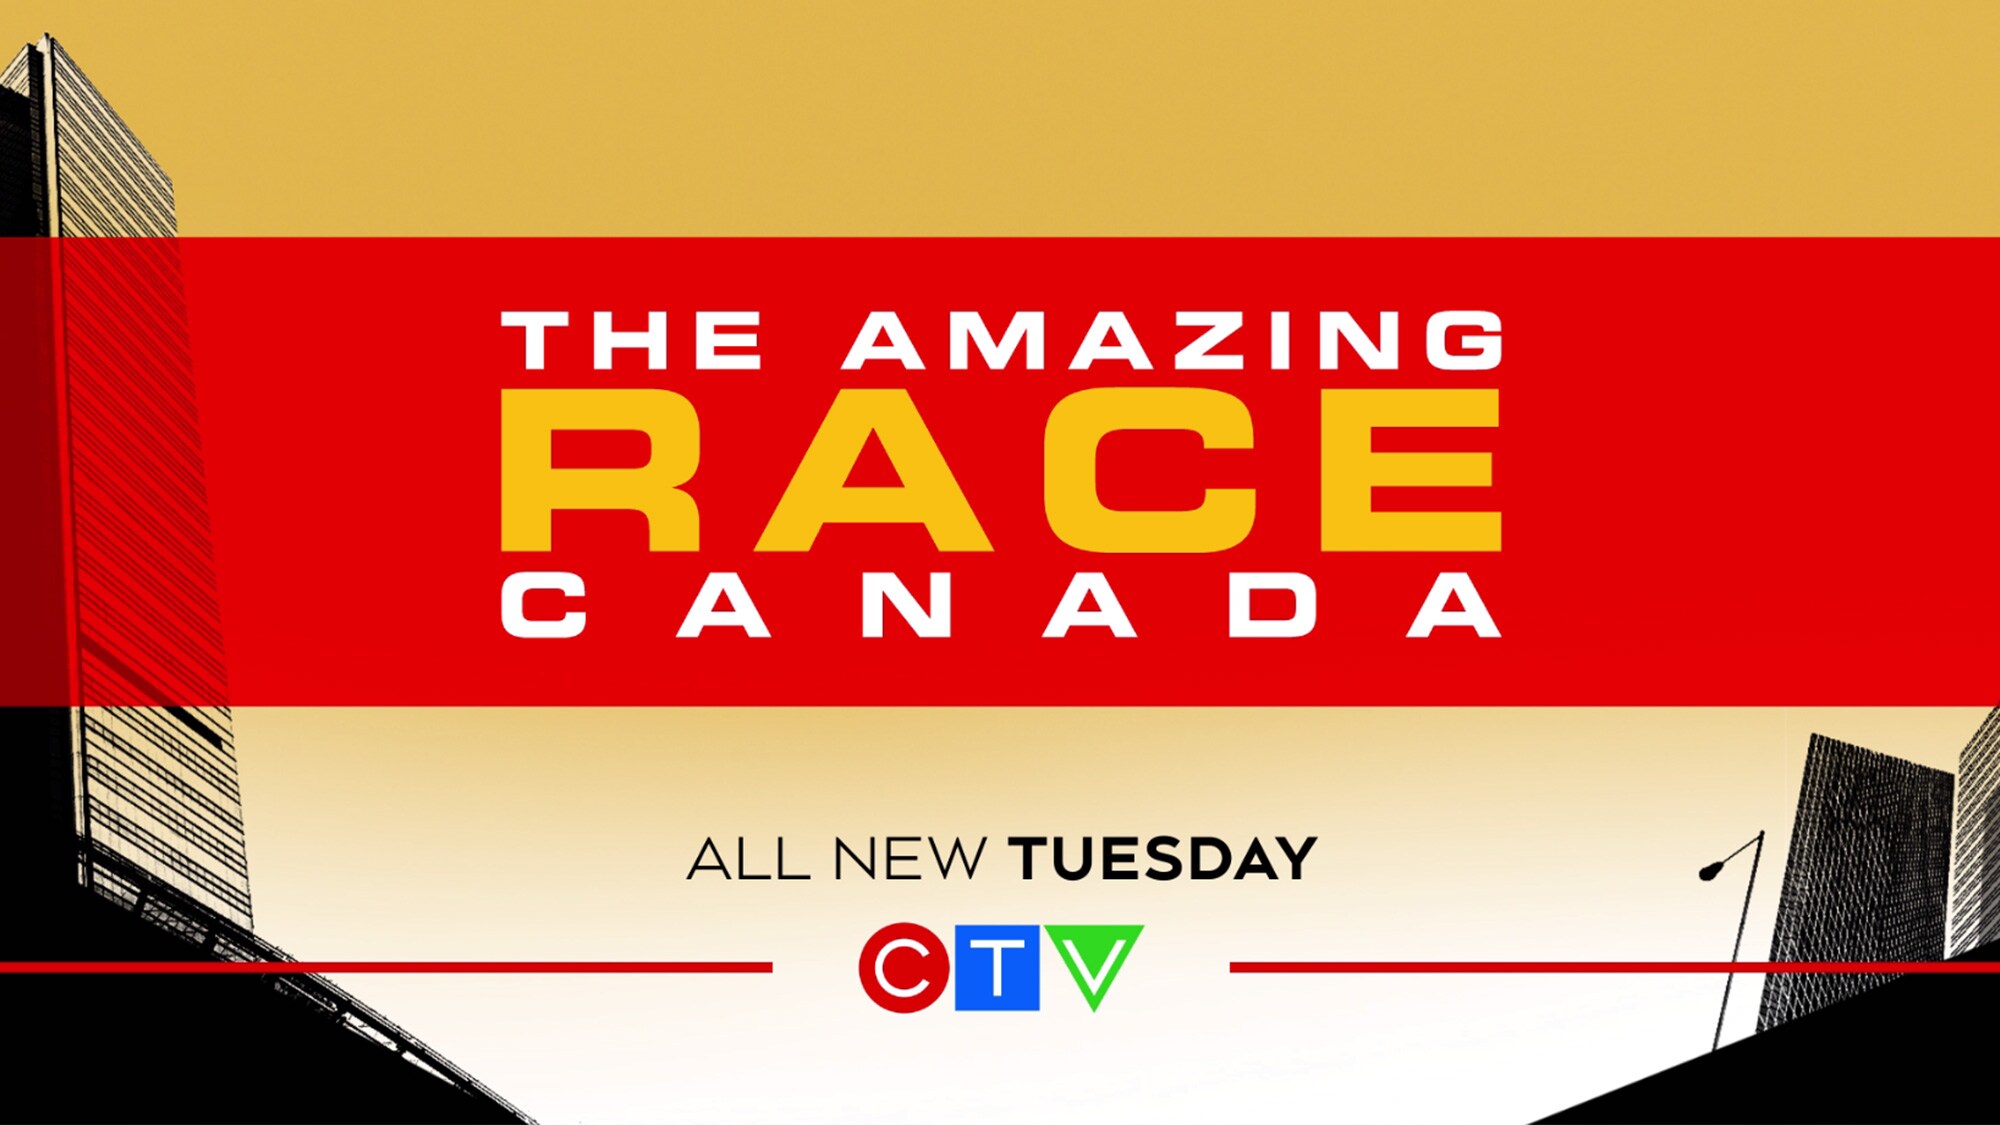 THE AMAZING RACE CANADA ALL NEW TUESDAY